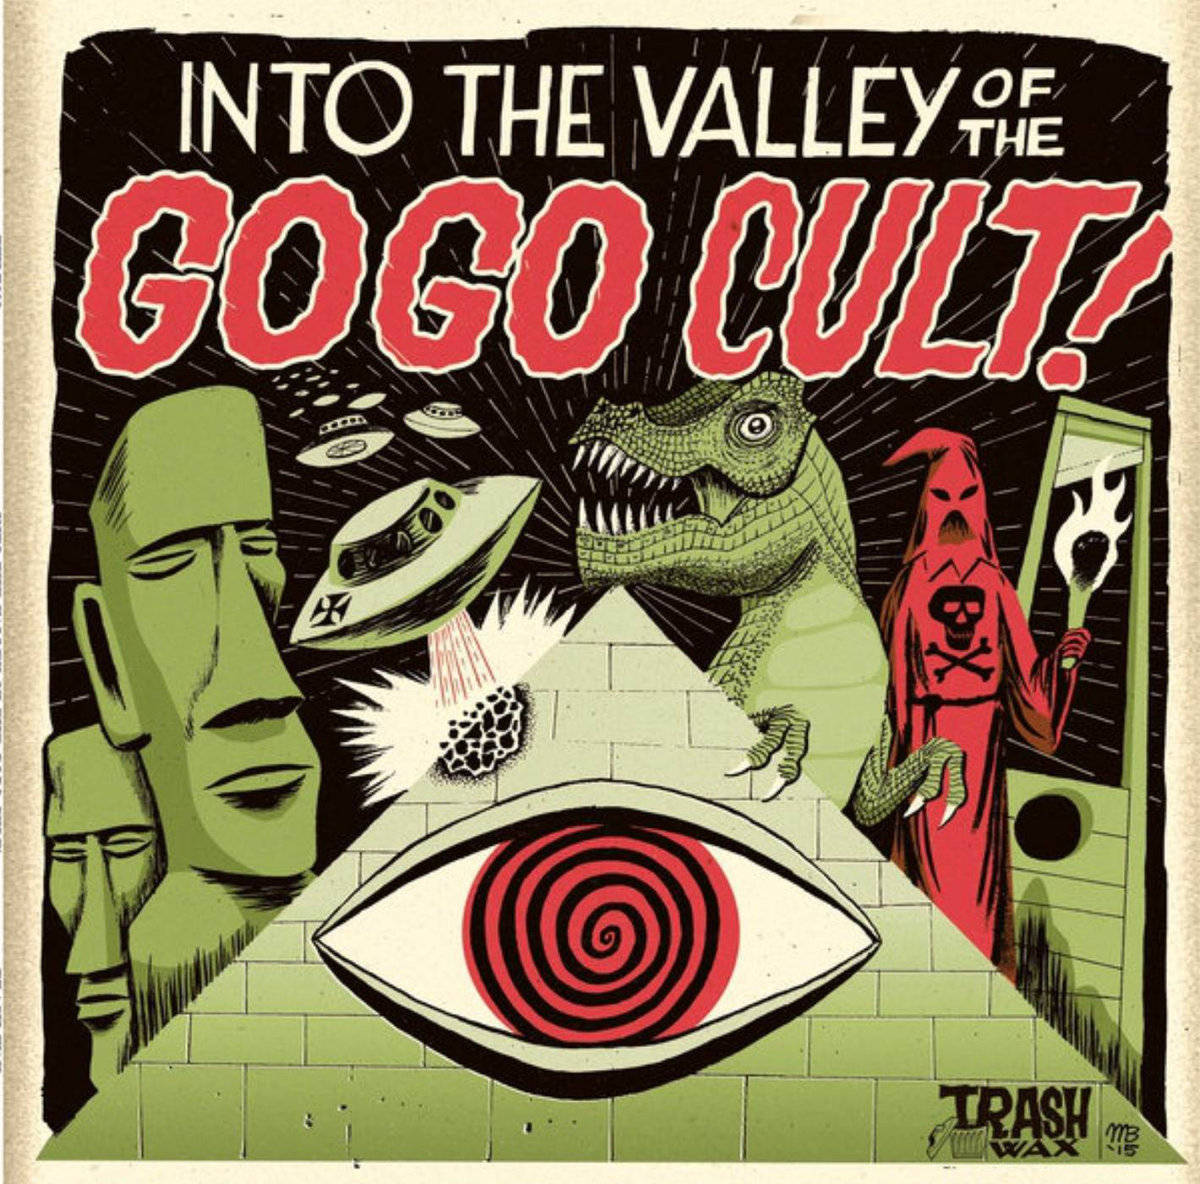 Go-Go-Cult-The---Into-The-Valley-Of-The-Go-Go-Cult!-lp